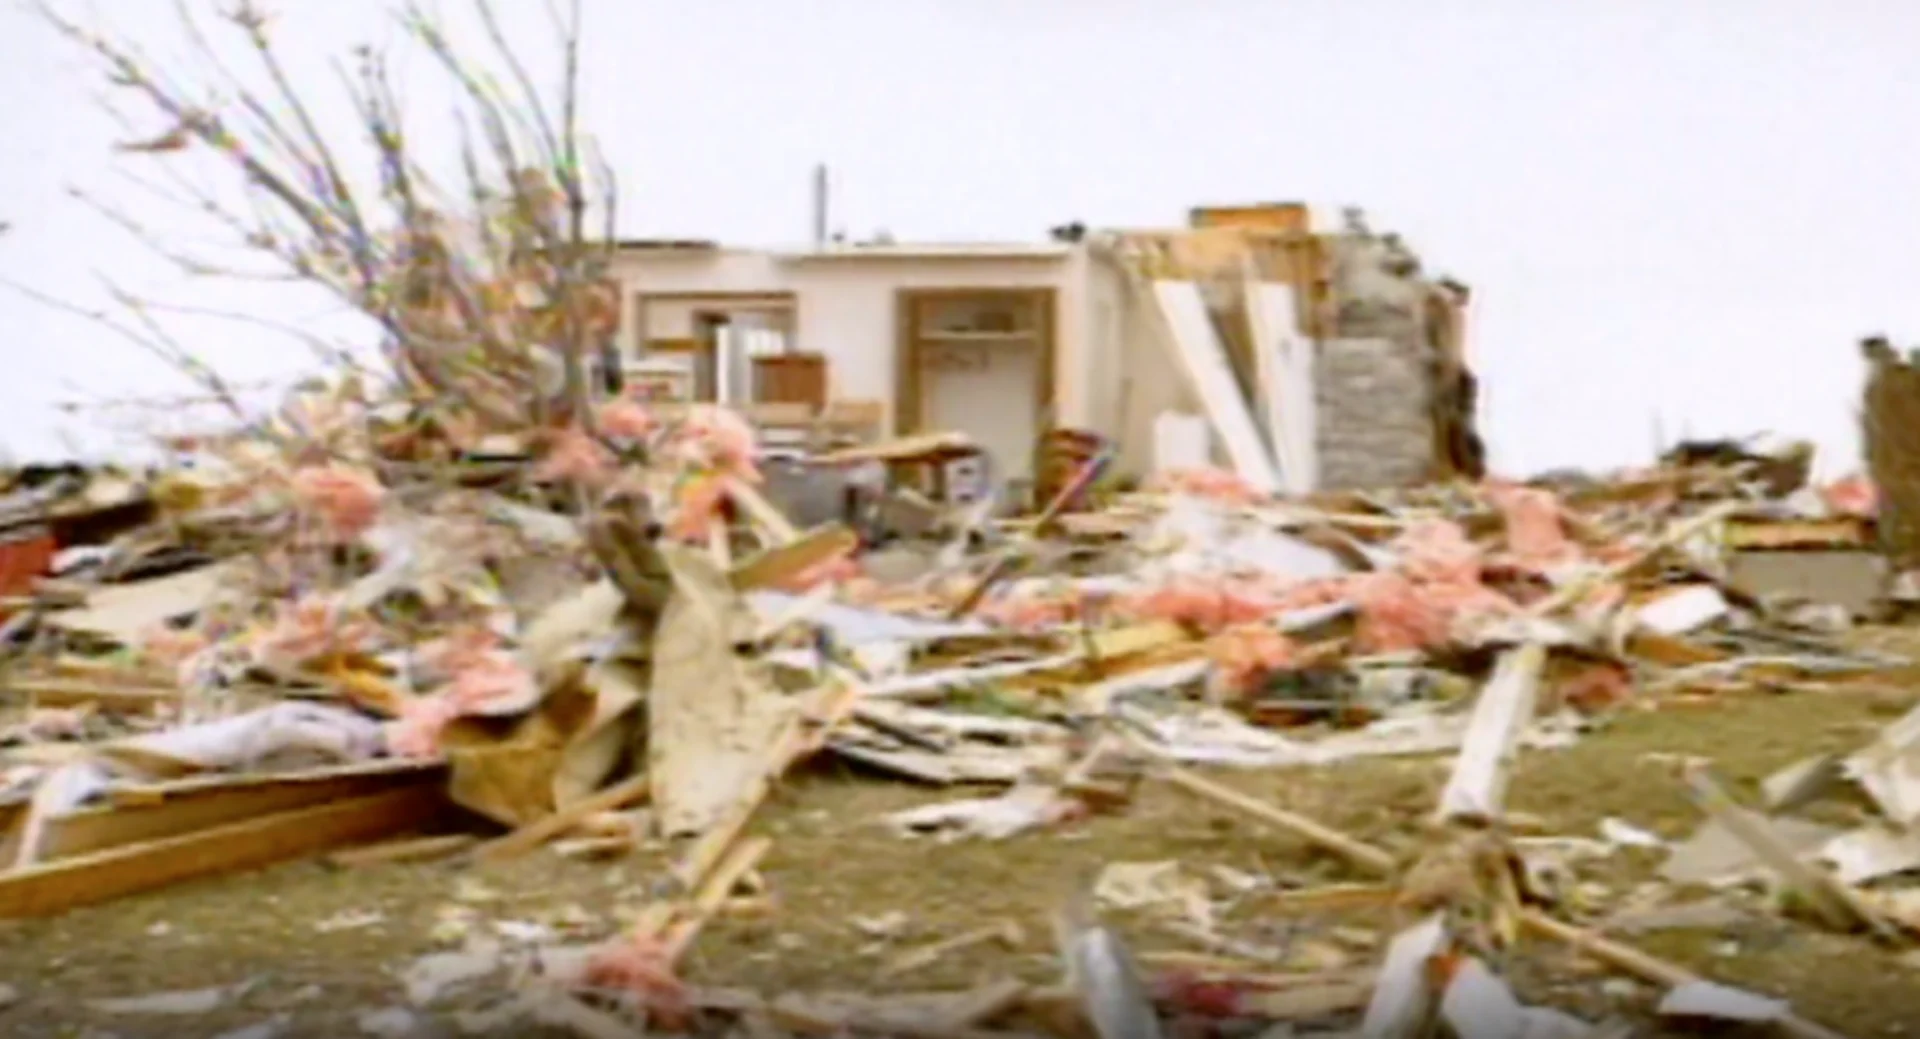 The terrifying 1996 Ontario tornadoes that made it rain sheet metal and wood